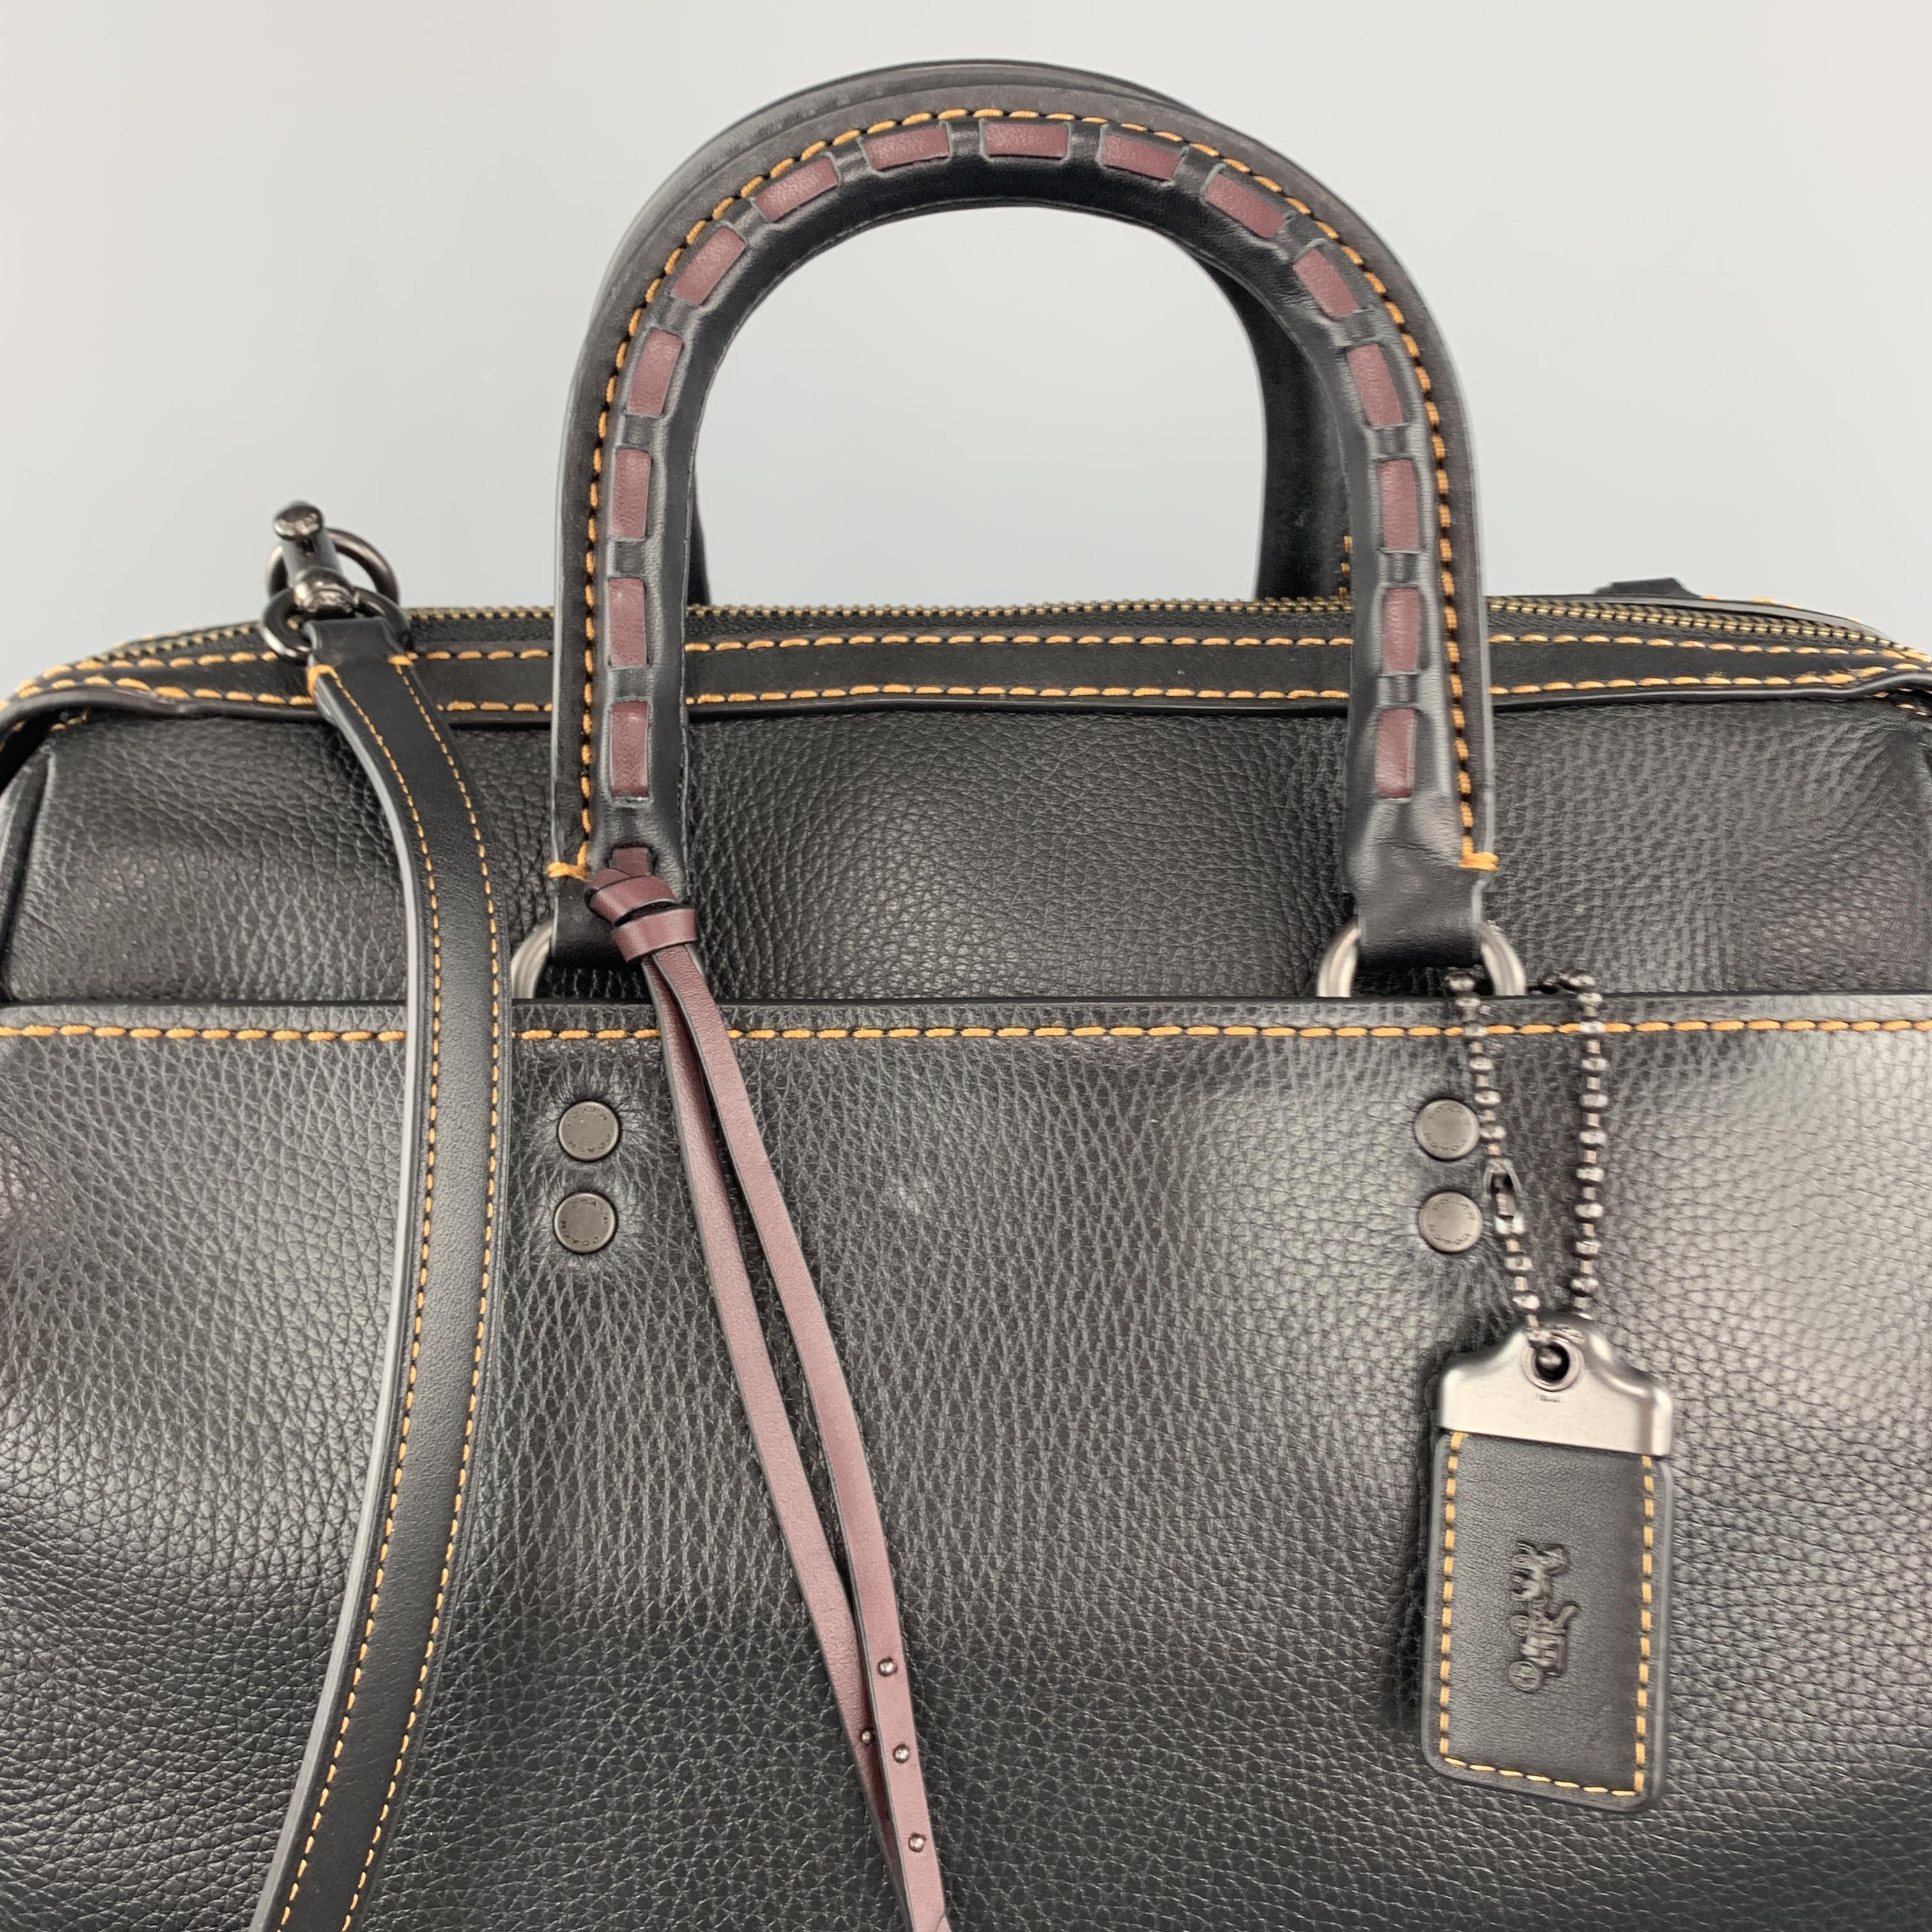 COACH handbag comes in black pebbled leather with contrast stitching, outer pockets, purple whipstich top handles, detachable strap, and suede interior. 

New without Tags.

Measurements:

Length: 12 in.
Width: 7 in.
Height: 8 in.
Drop: 19 in.